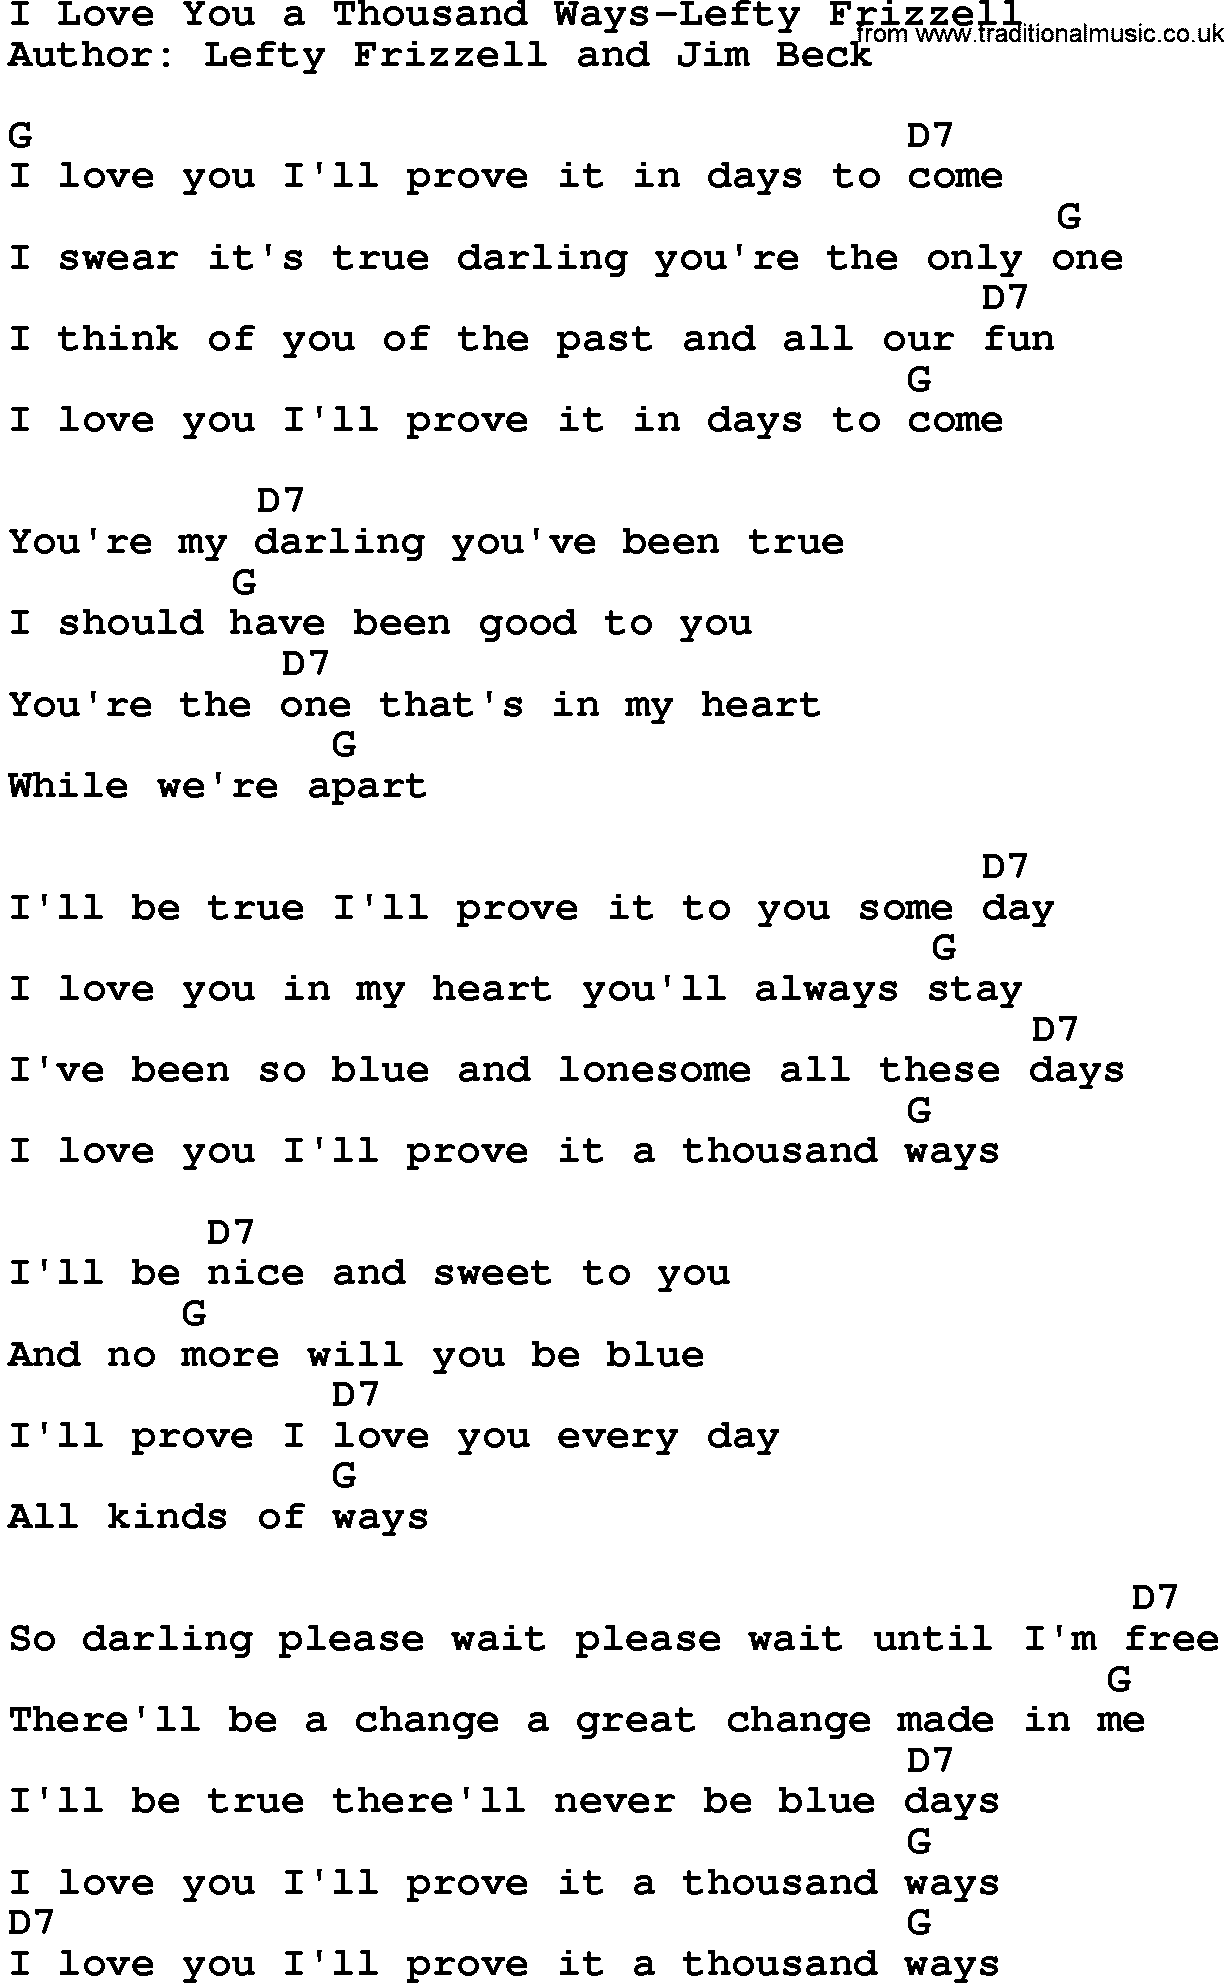 Country music song: I Love You A Thousand Ways-Lefty Frizzell lyrics and chords